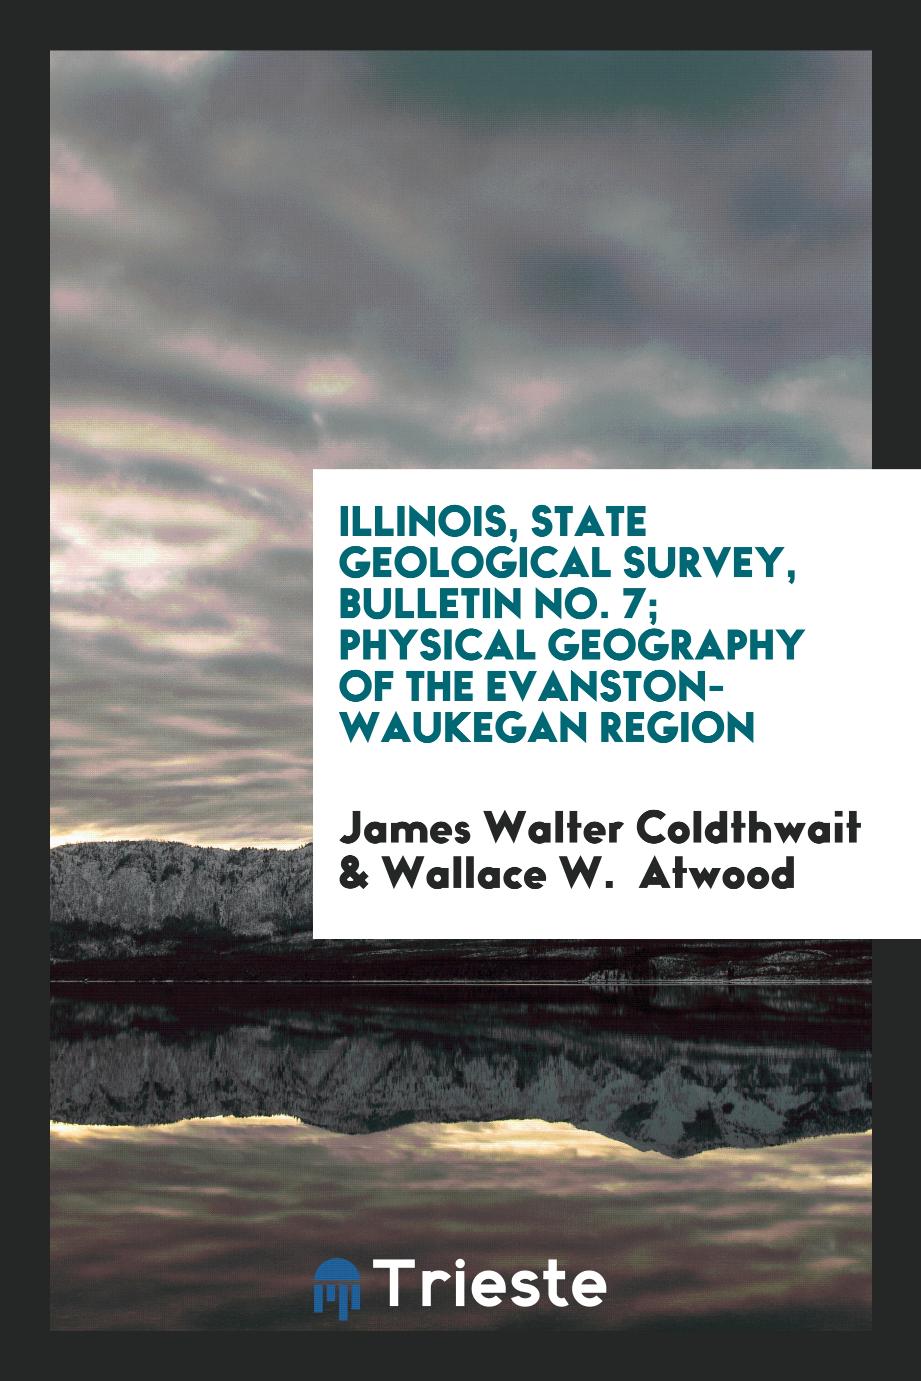 Illinois, State Geological Survey, Bulletin No. 7; Physical Geography of the Evanston-Waukegan Region